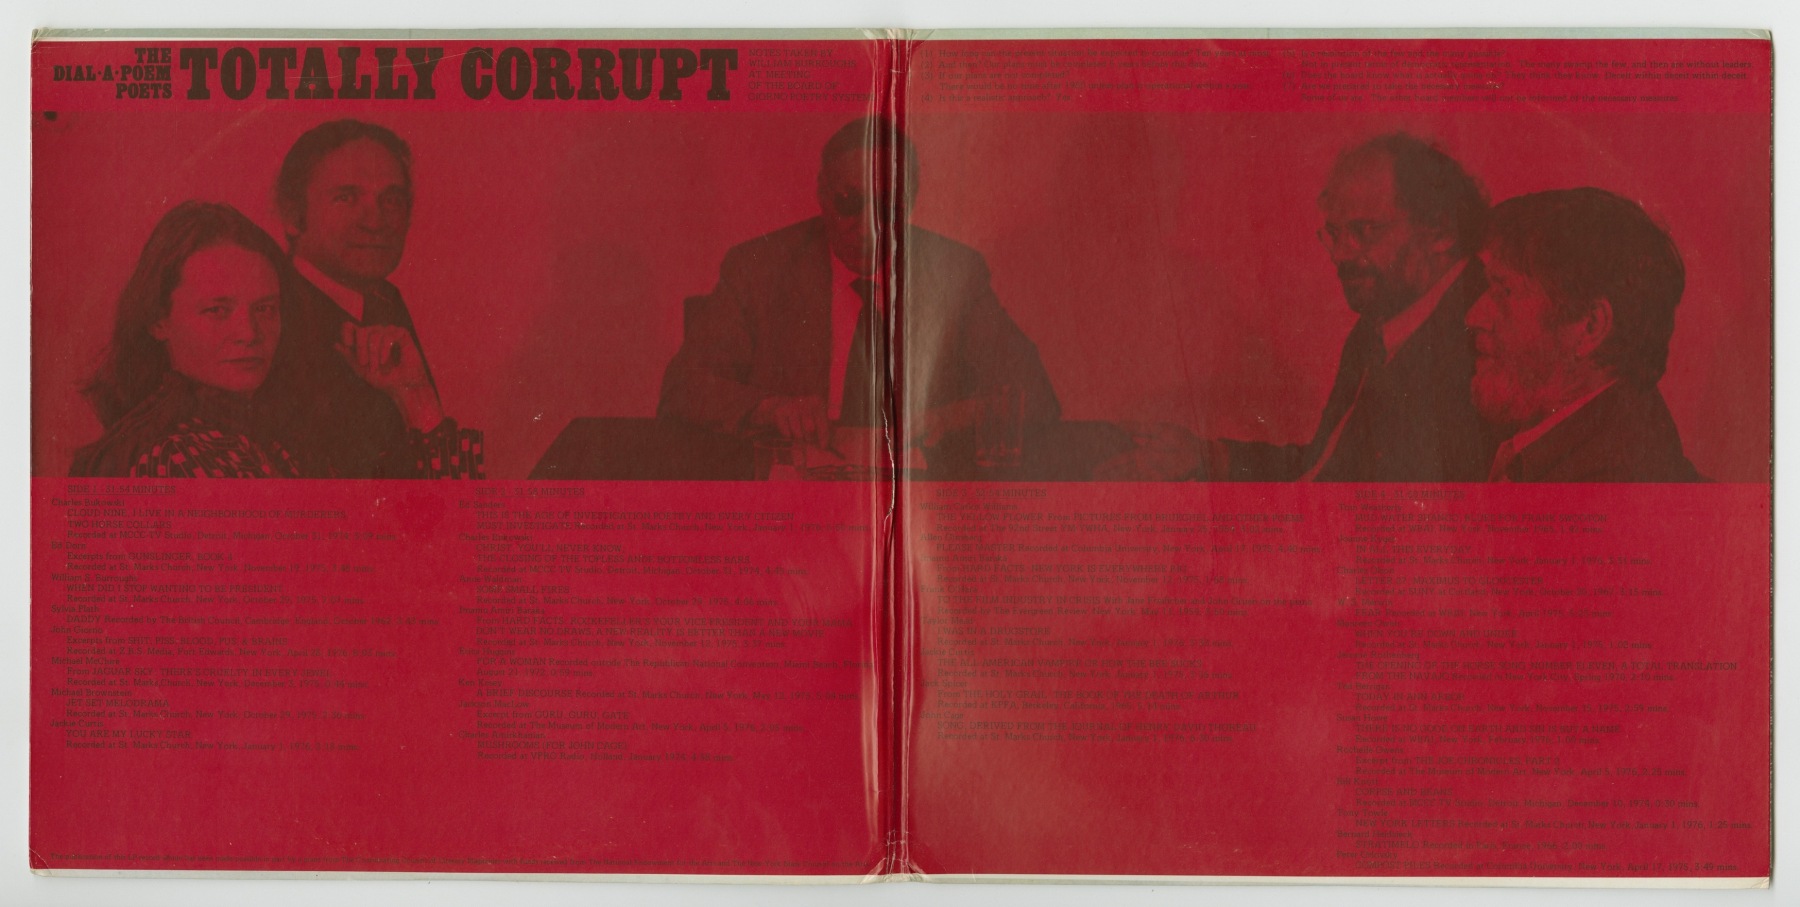 The Dial-A-Poem Poets: Totally Corrupt (1976), inside spread